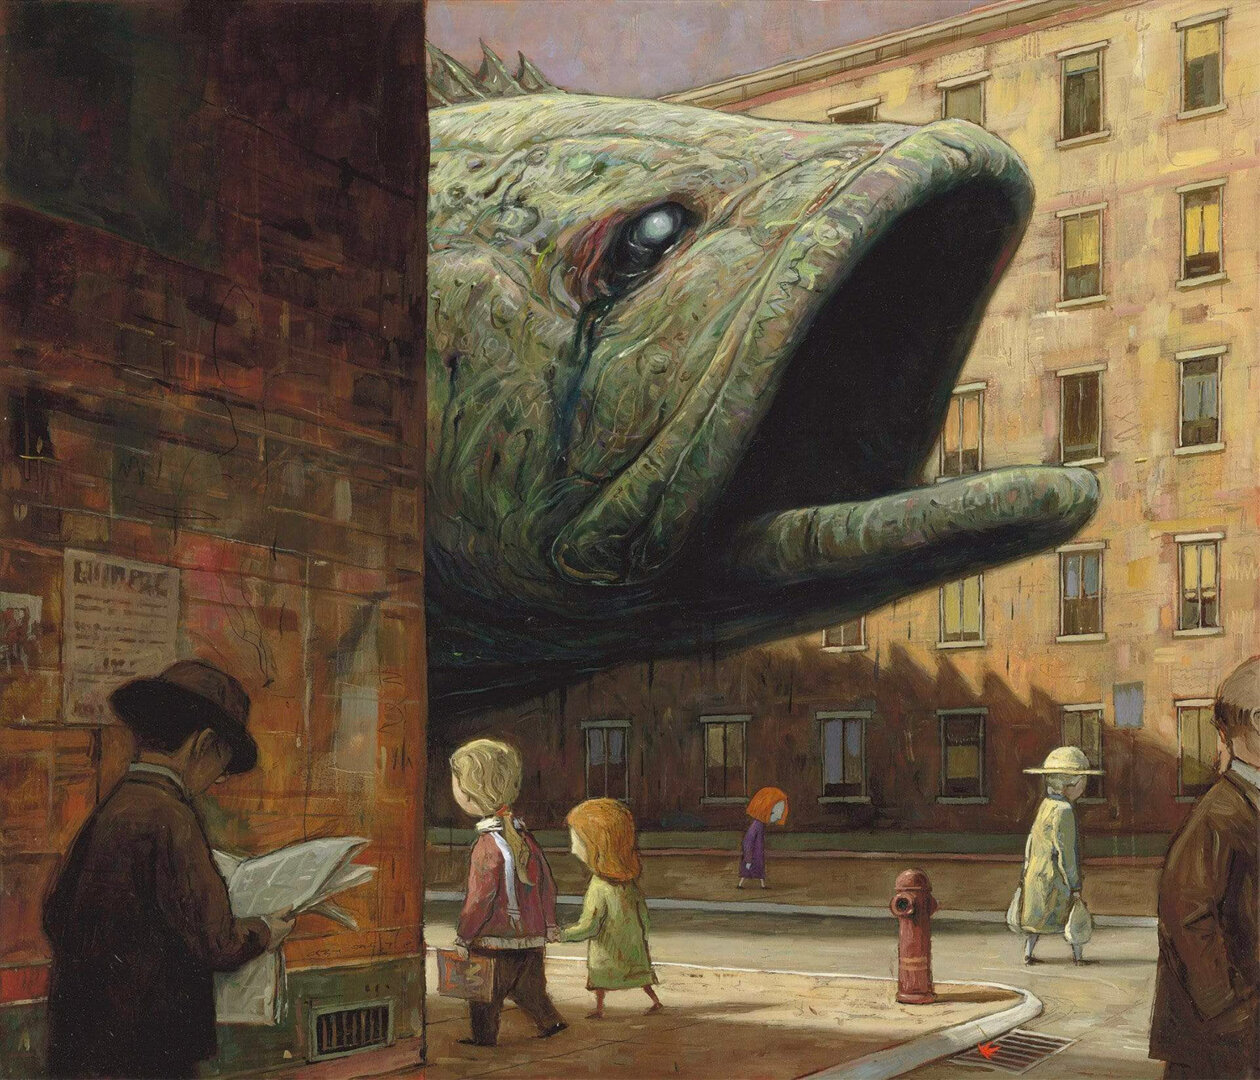 Dreamlike Paintings And Illustrations By Shaun Tan (7)